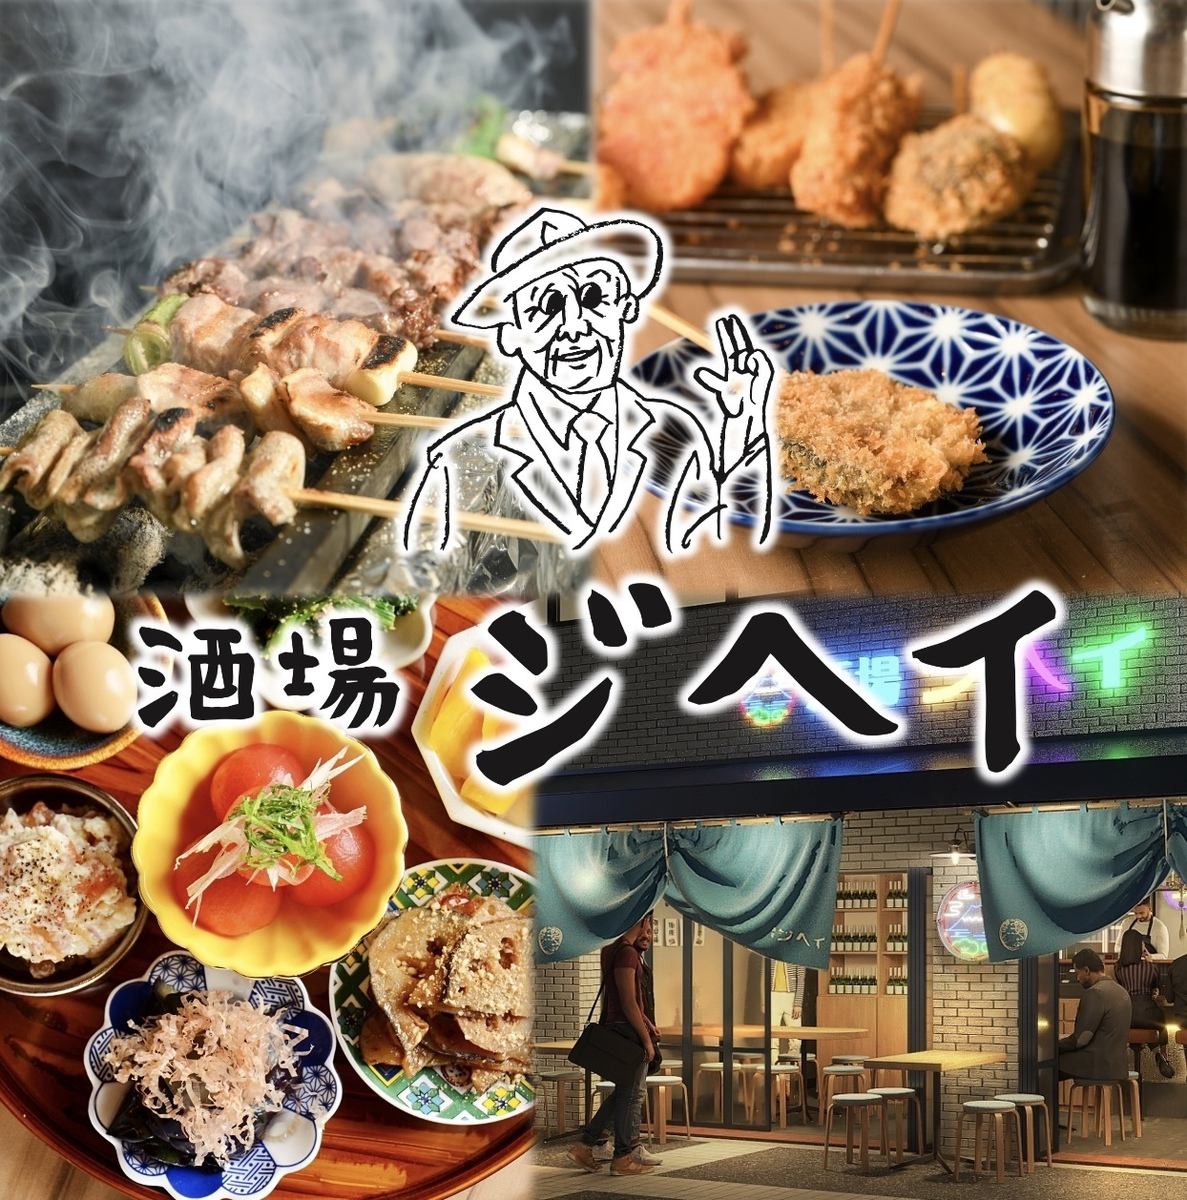 A public bar where you can enjoy grilled pork and kushikatsu with the old man!